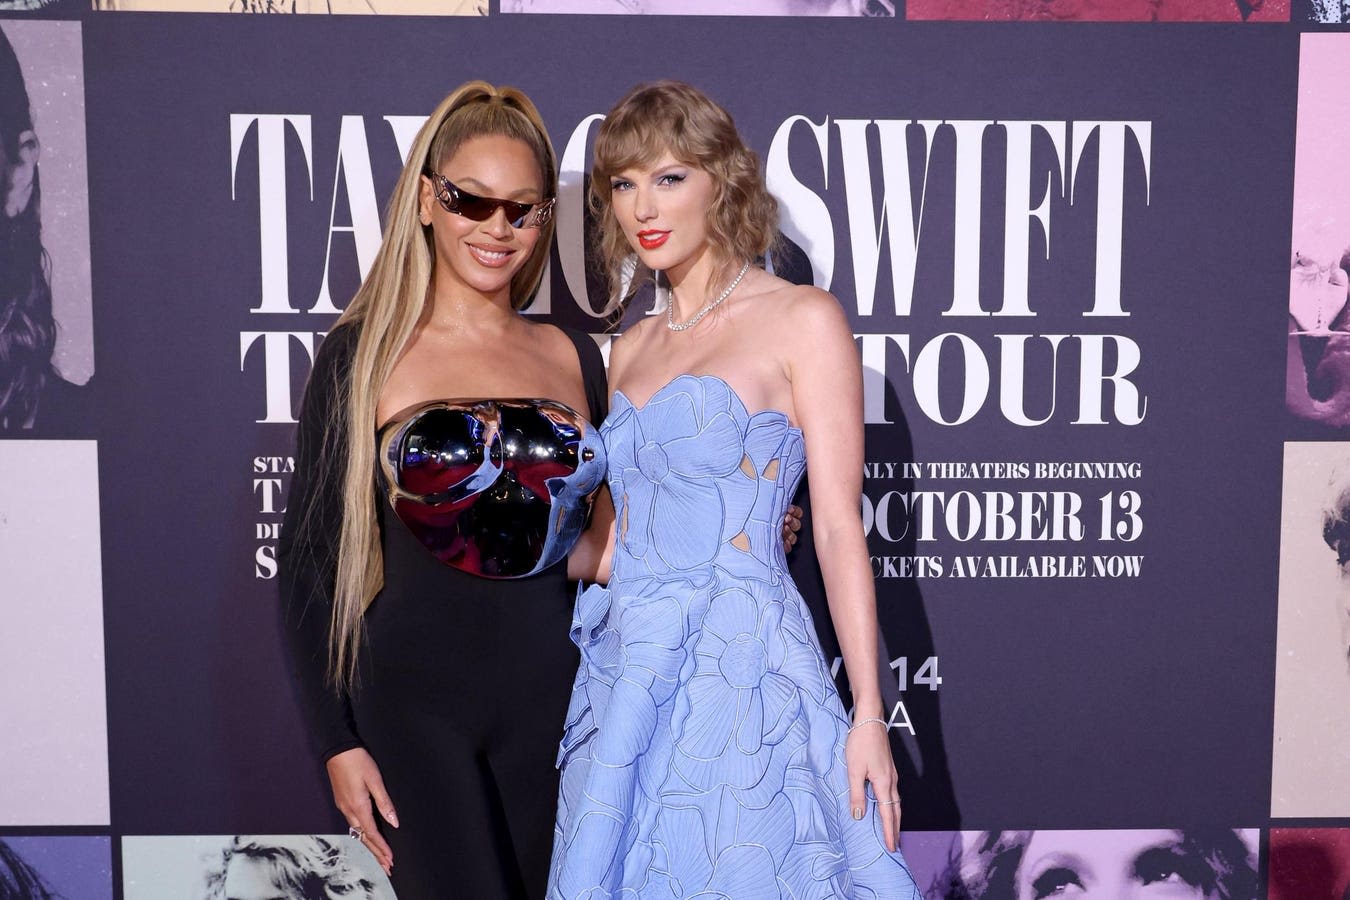 Beyoncé And Taylor Swift Are Bound To Compete Against Each Other For The Grammys’ Top Prize—Again